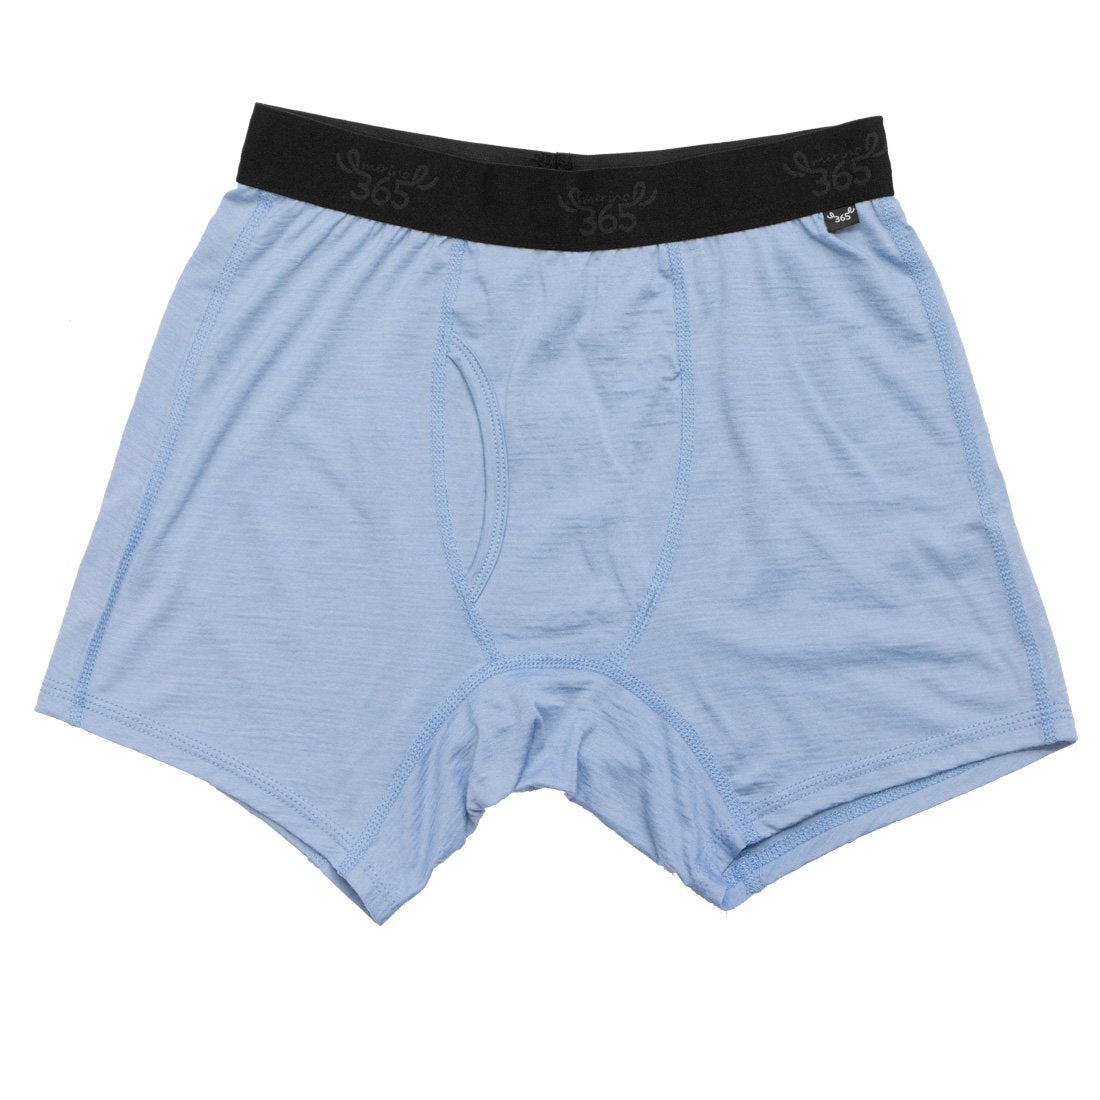 Merino 365 Men's Boxer Brief with Fly, Pale Blue